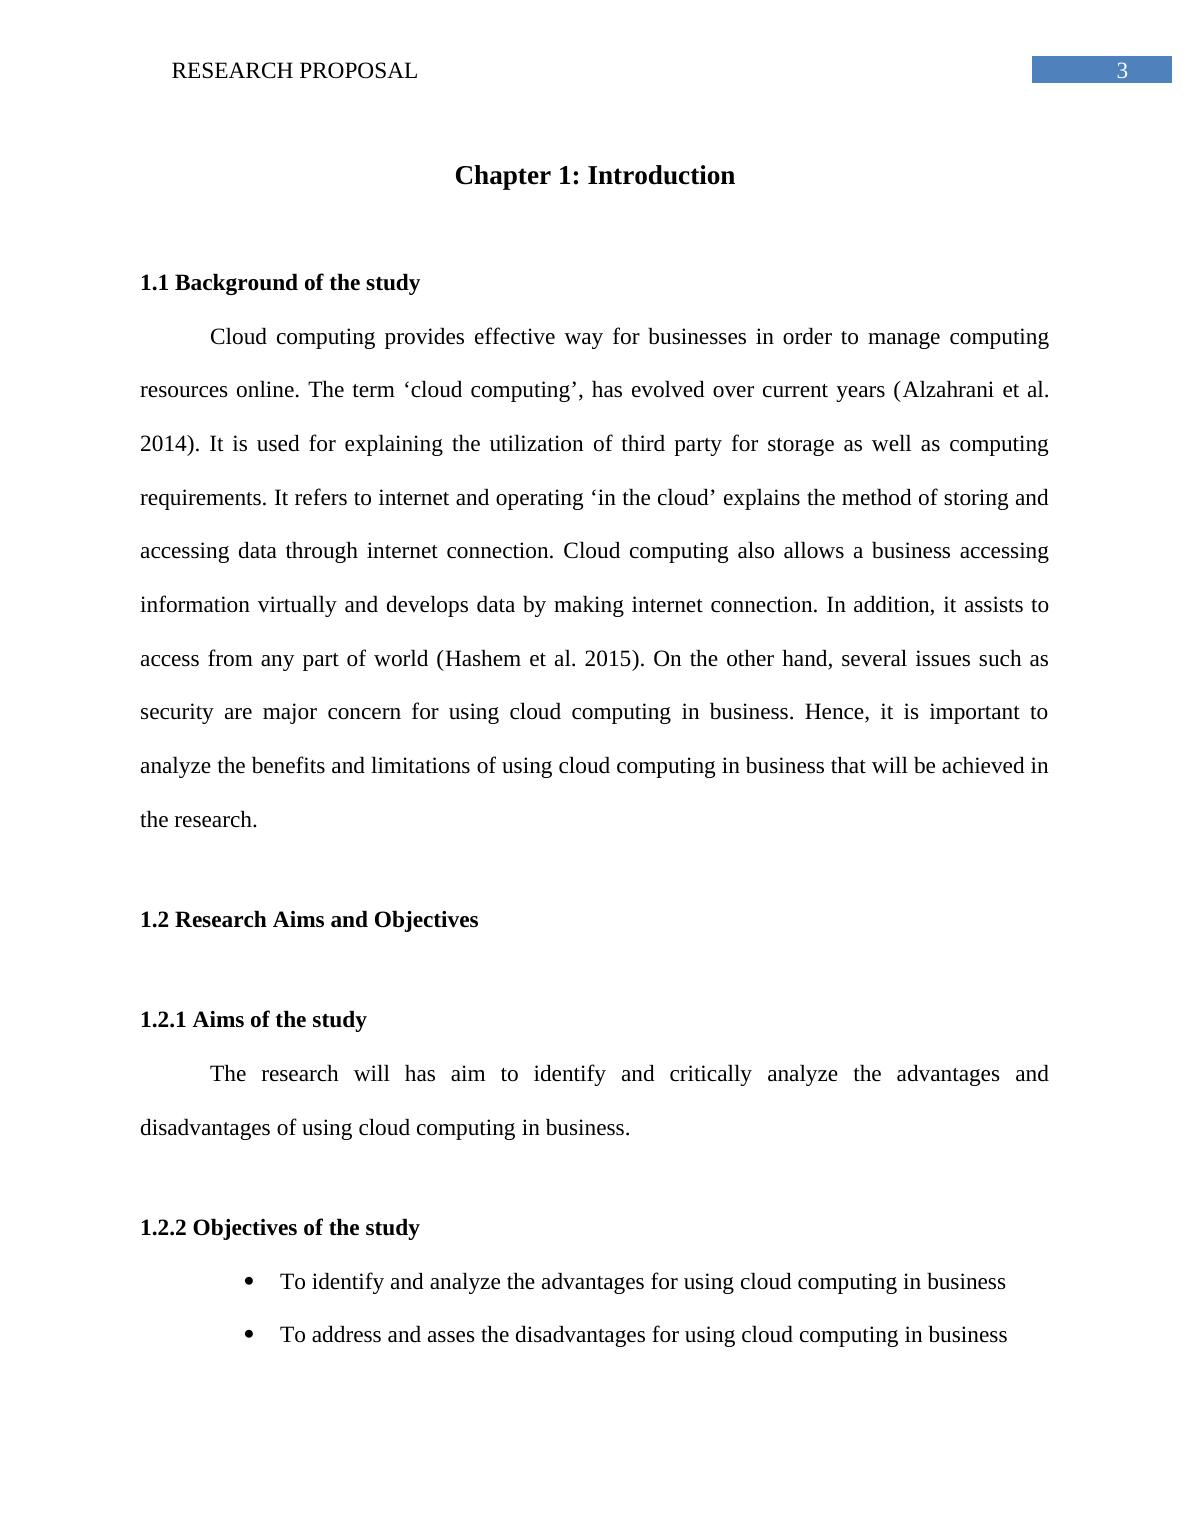 ITN 263 - Research Proposal on Advantages and Disadvantages of Cloud Computing for Businesses_4